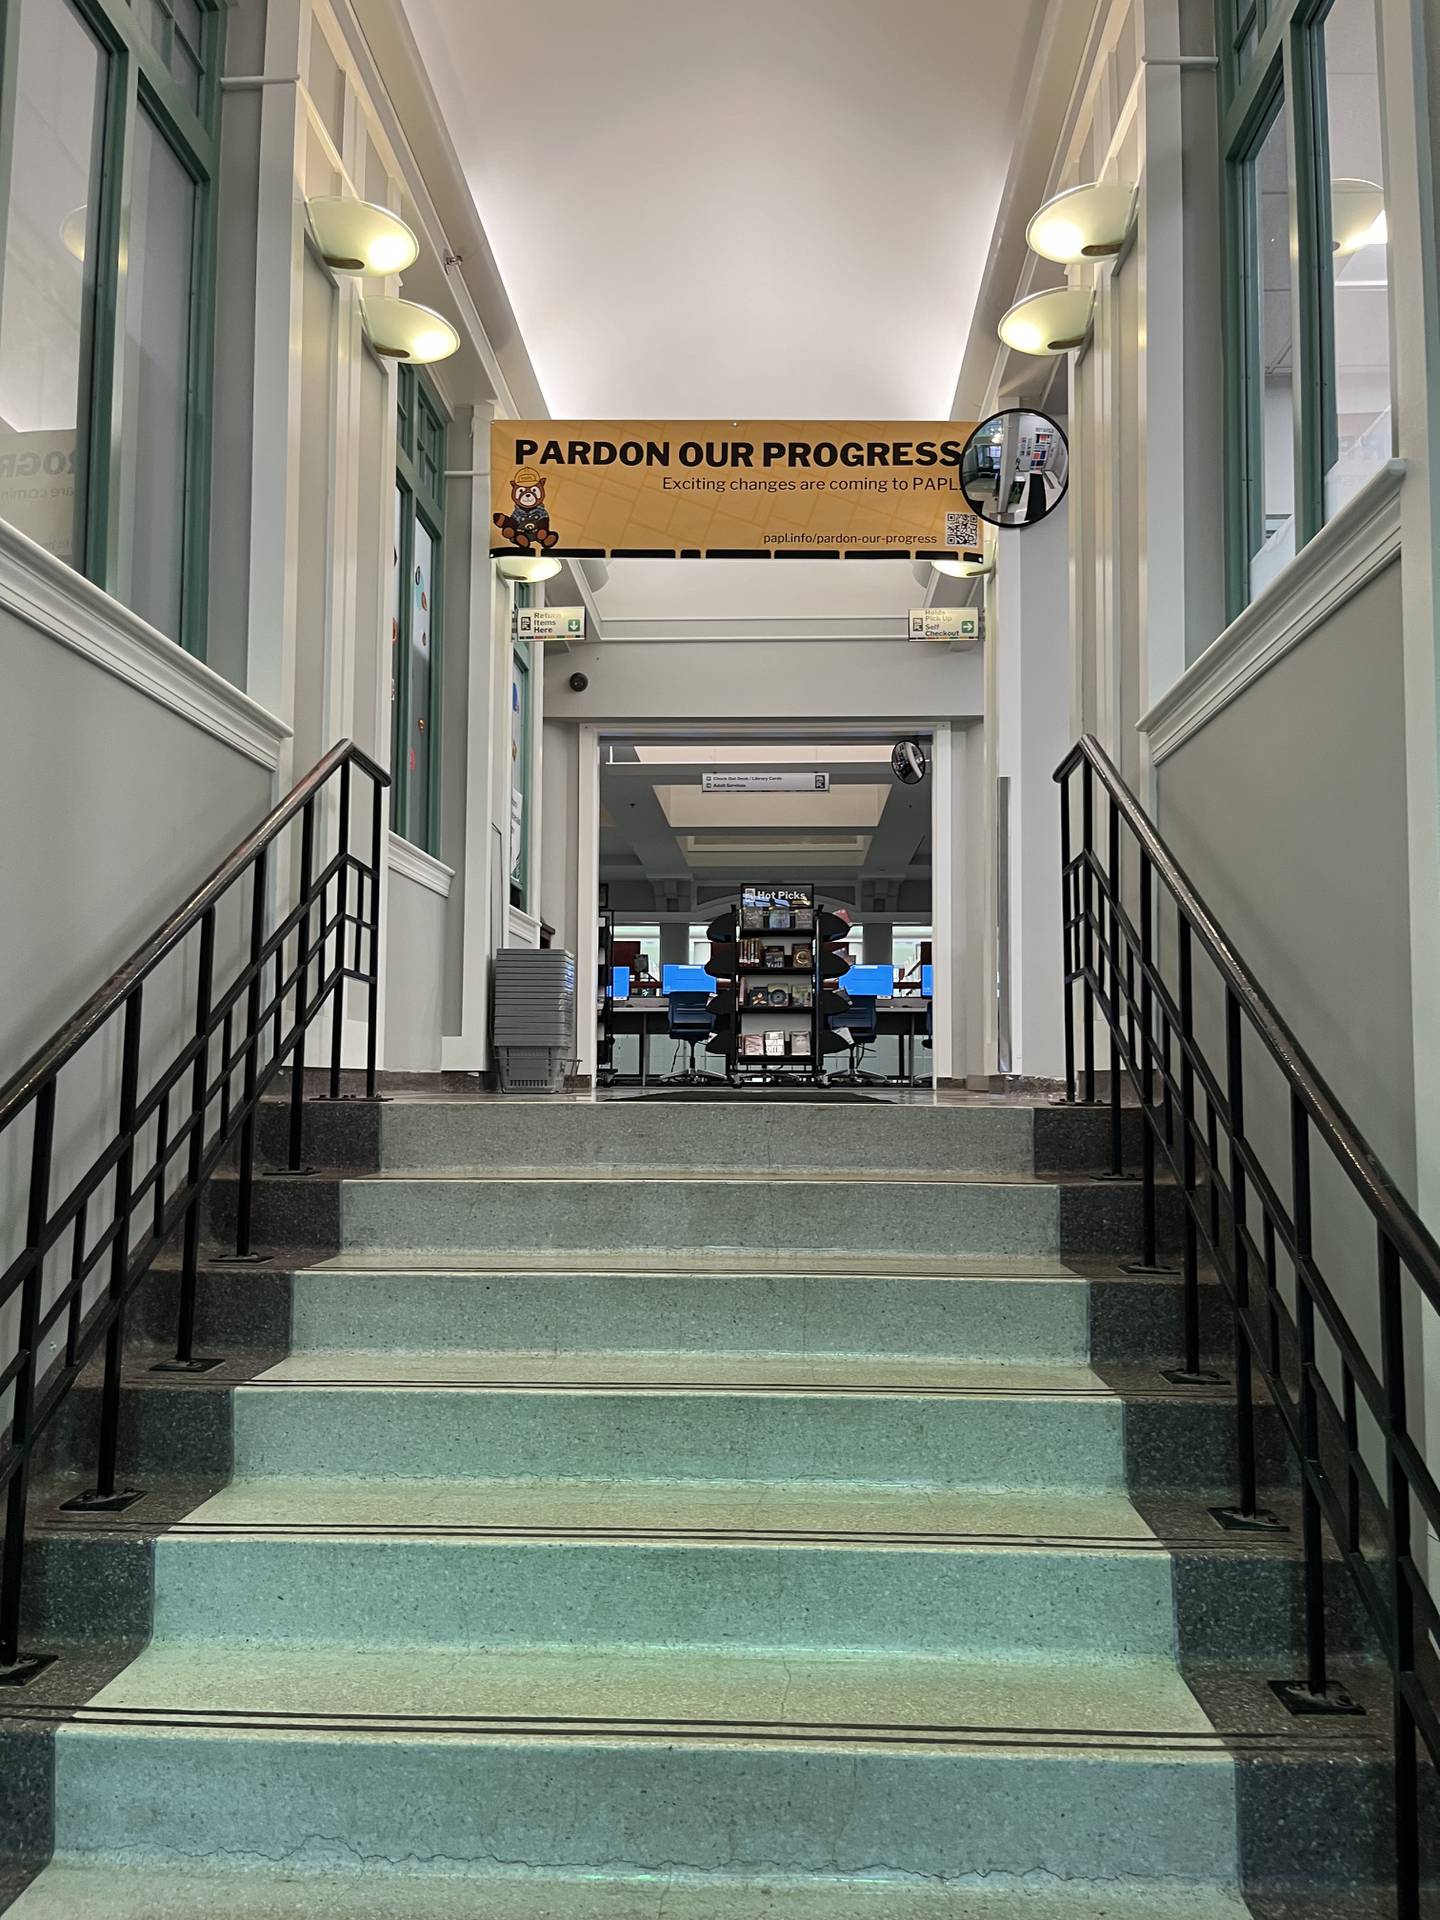 The center staircase in Plainfield Area Public Library will be removed as part of $10.5 million renovation project that will begin this spring.